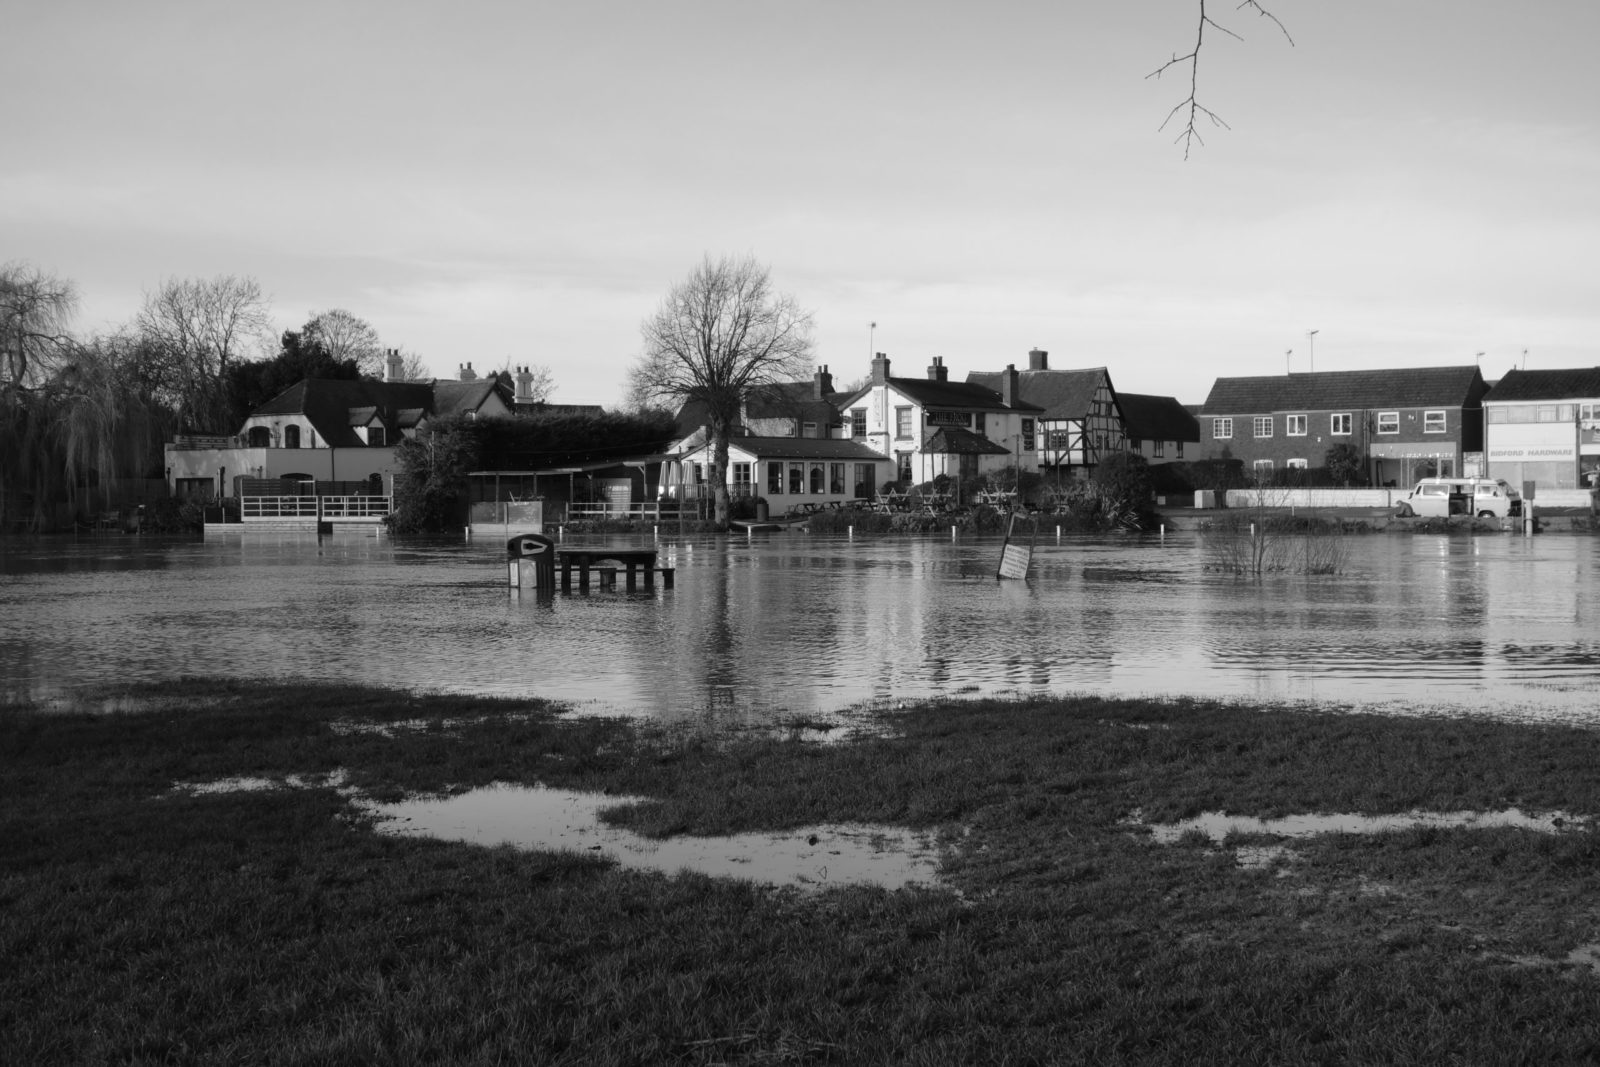 Flooded river banks in Warwickshire, England